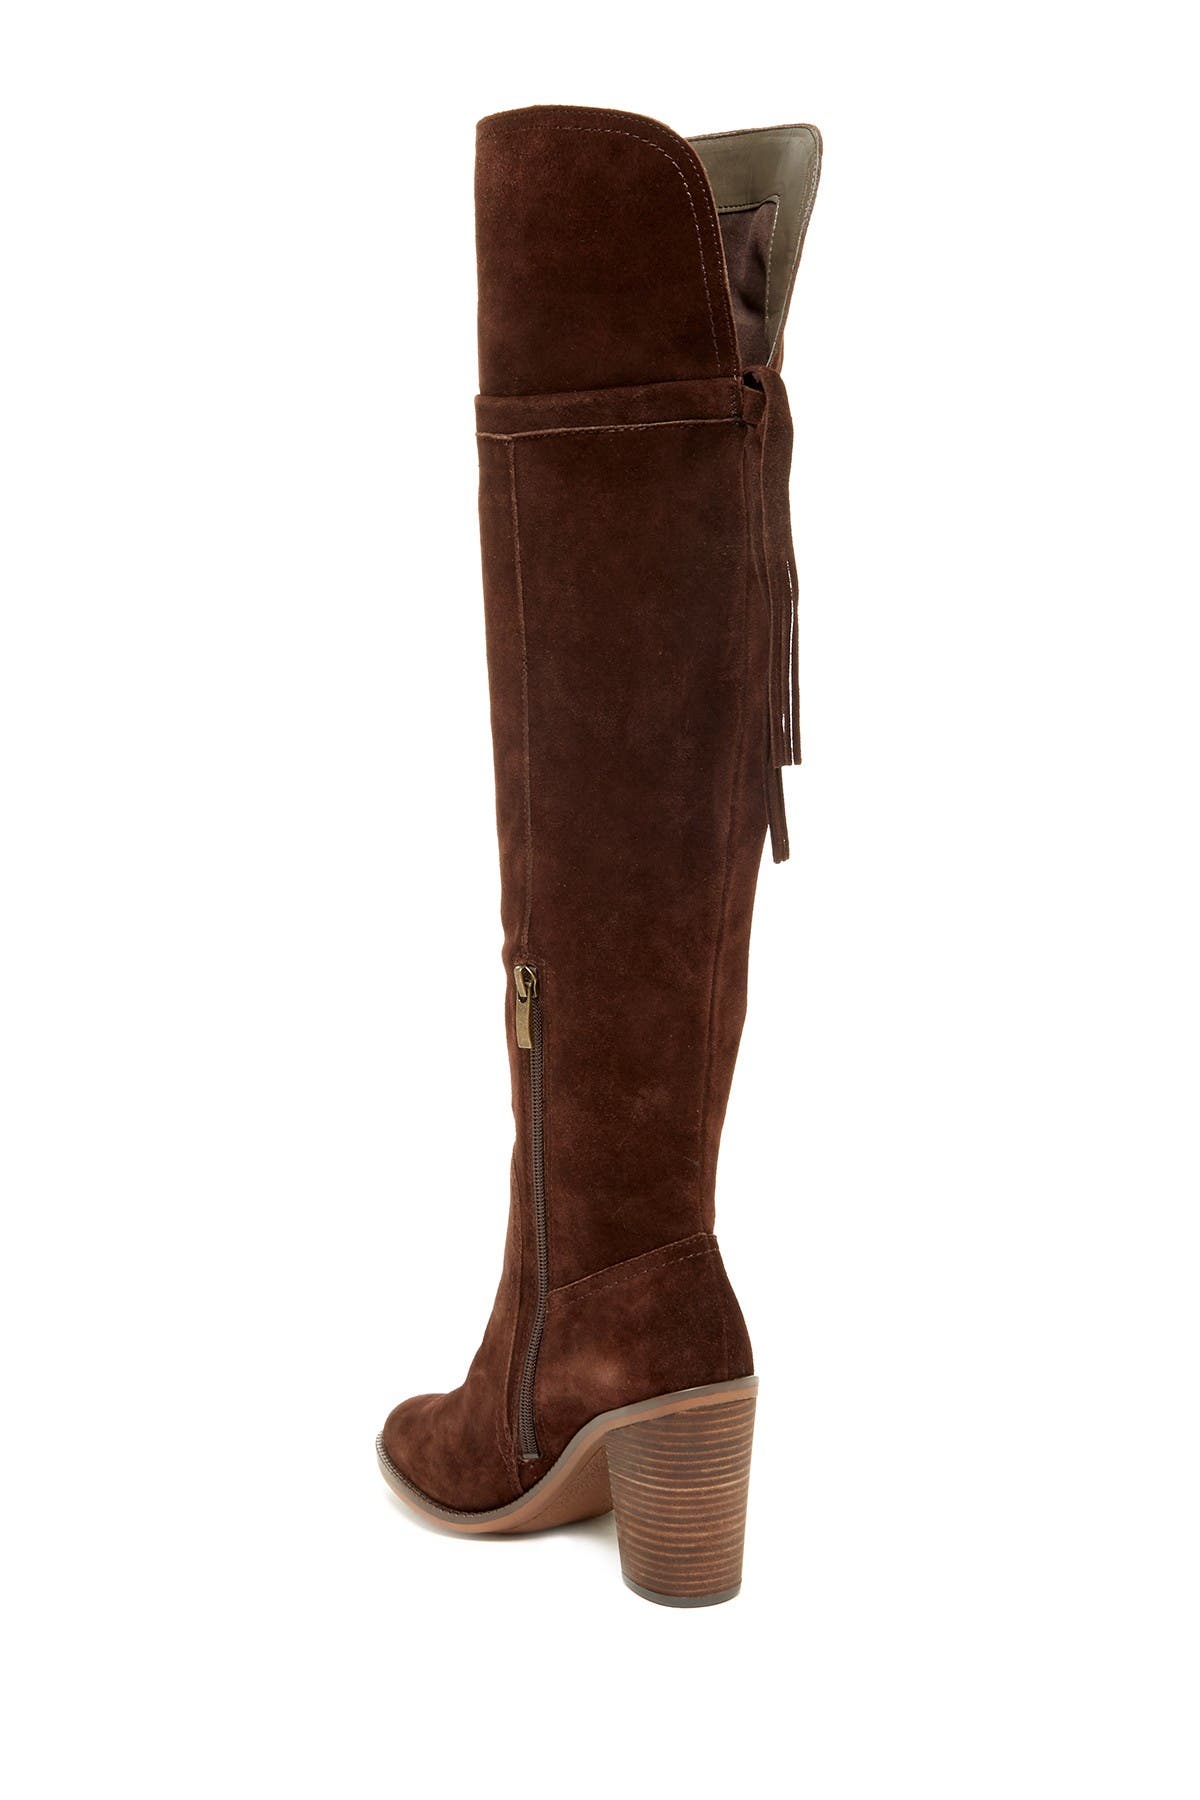 franco sarto over the knee suede boots